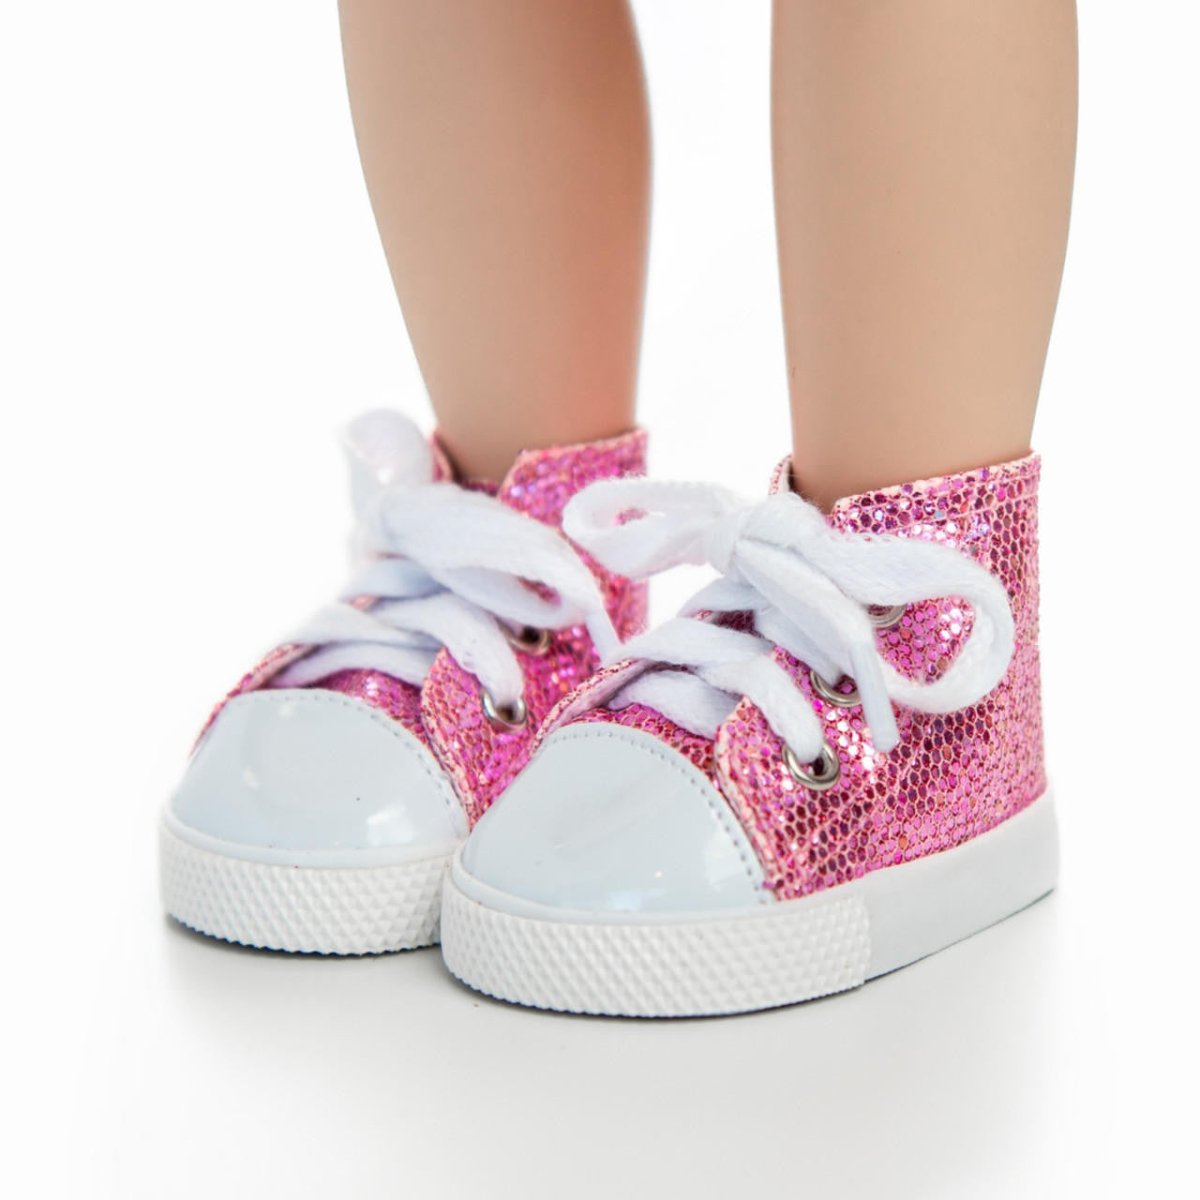 Set of 2 Pair of Sparkly Sneaker Shoes for 18" Dolls Bundle - Simon's Collectibles